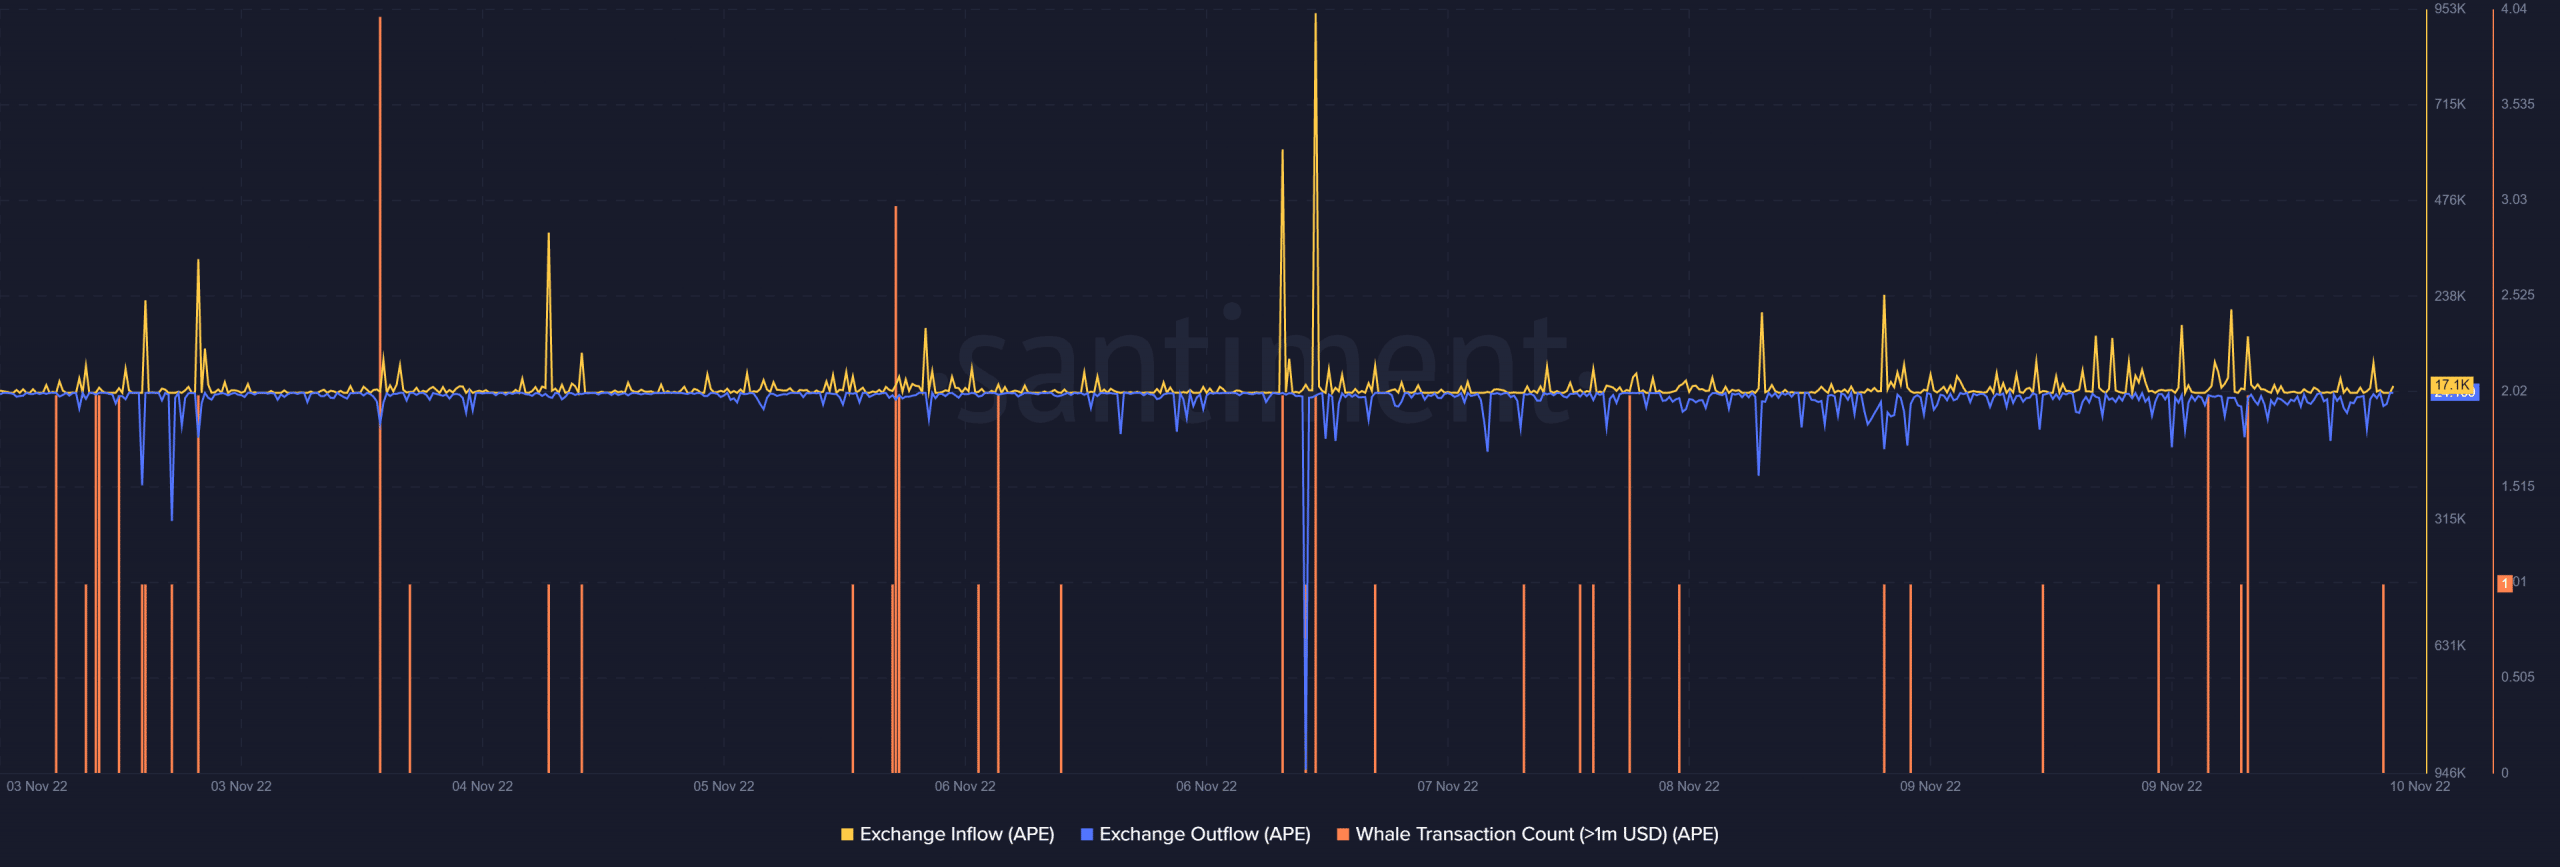 APE exchange flows and whale transaction count